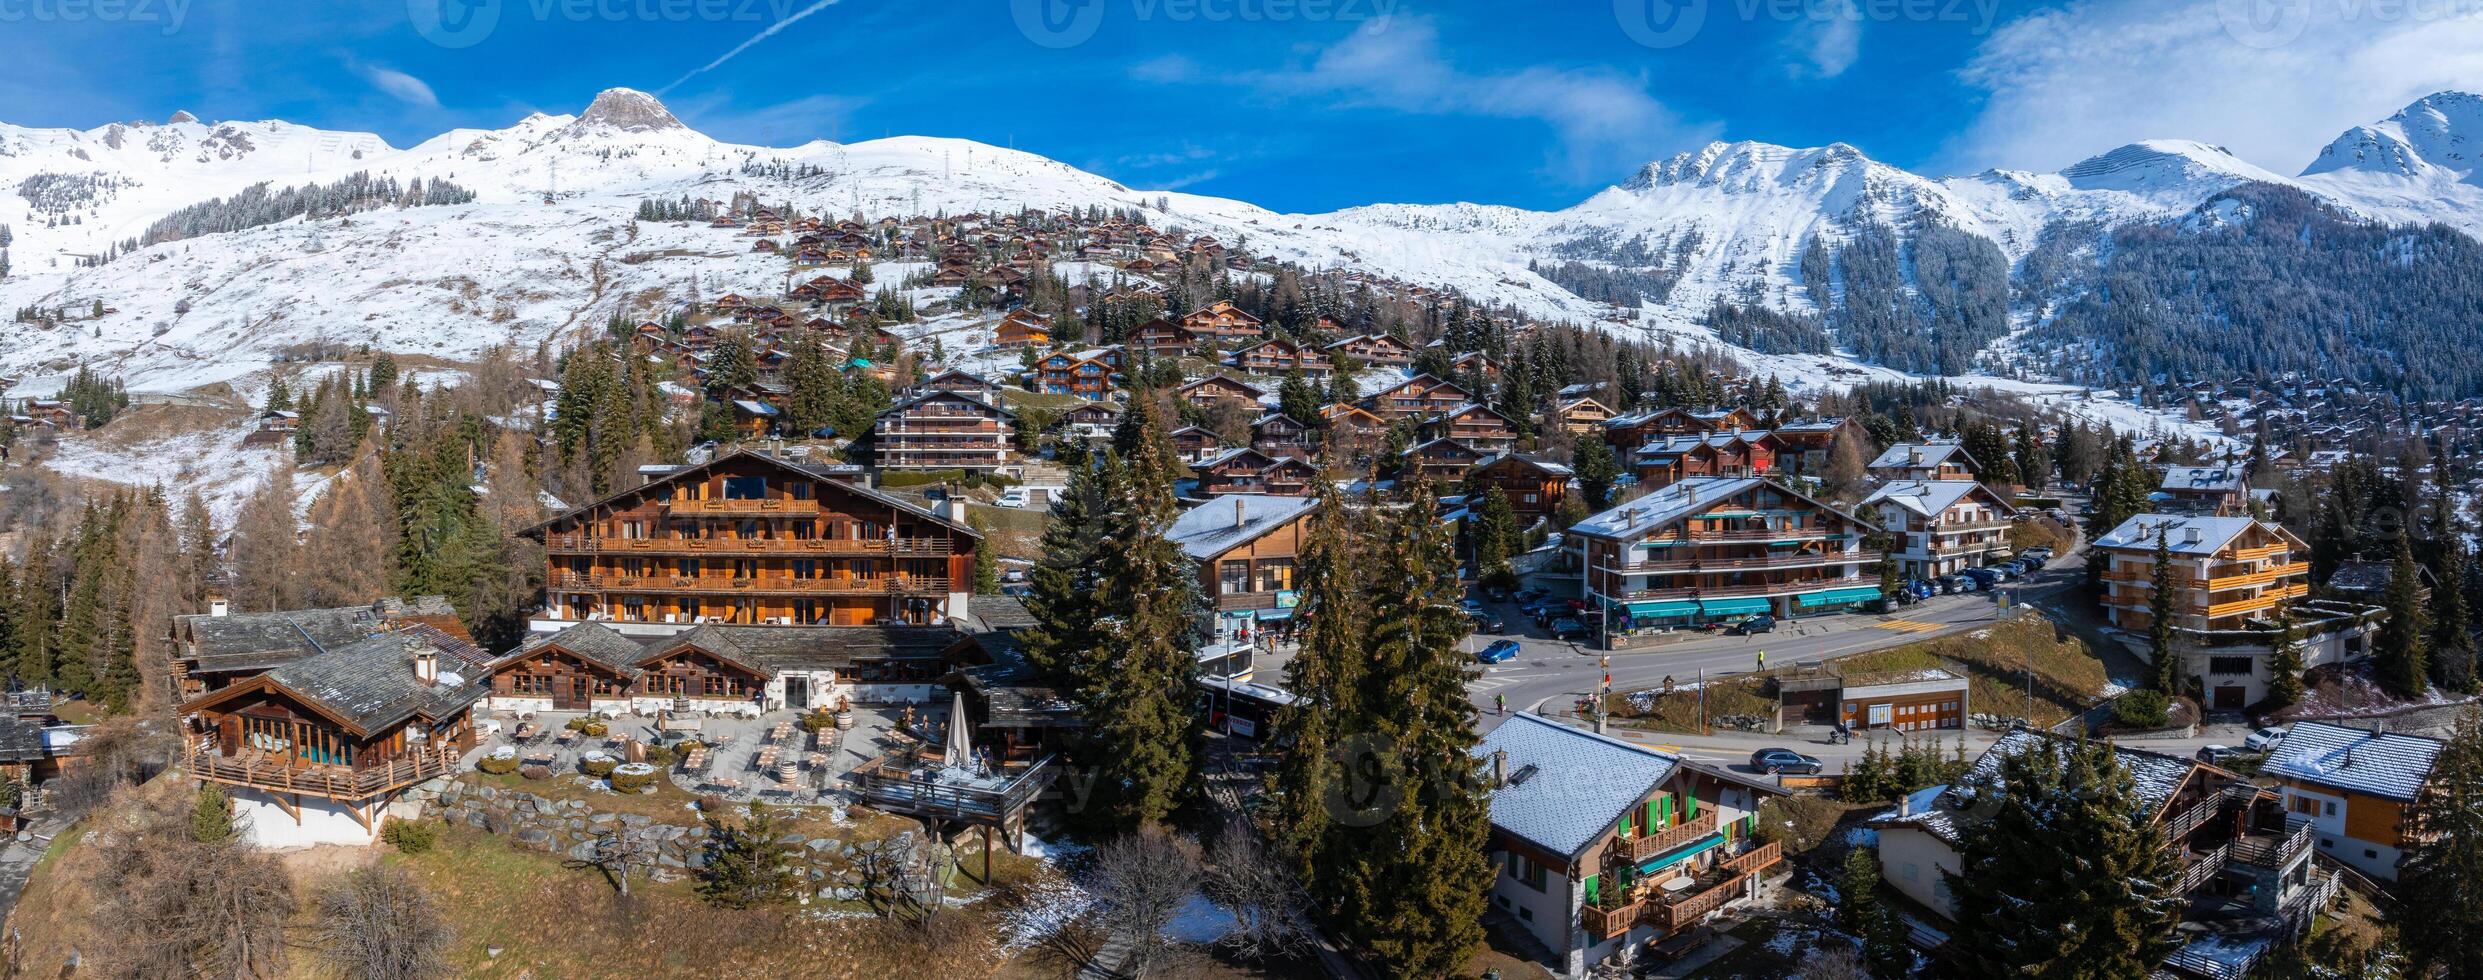 Aerial View of Verbier, Switzerland  A Luxurious Ski Town Amid Snow and Greenery photo